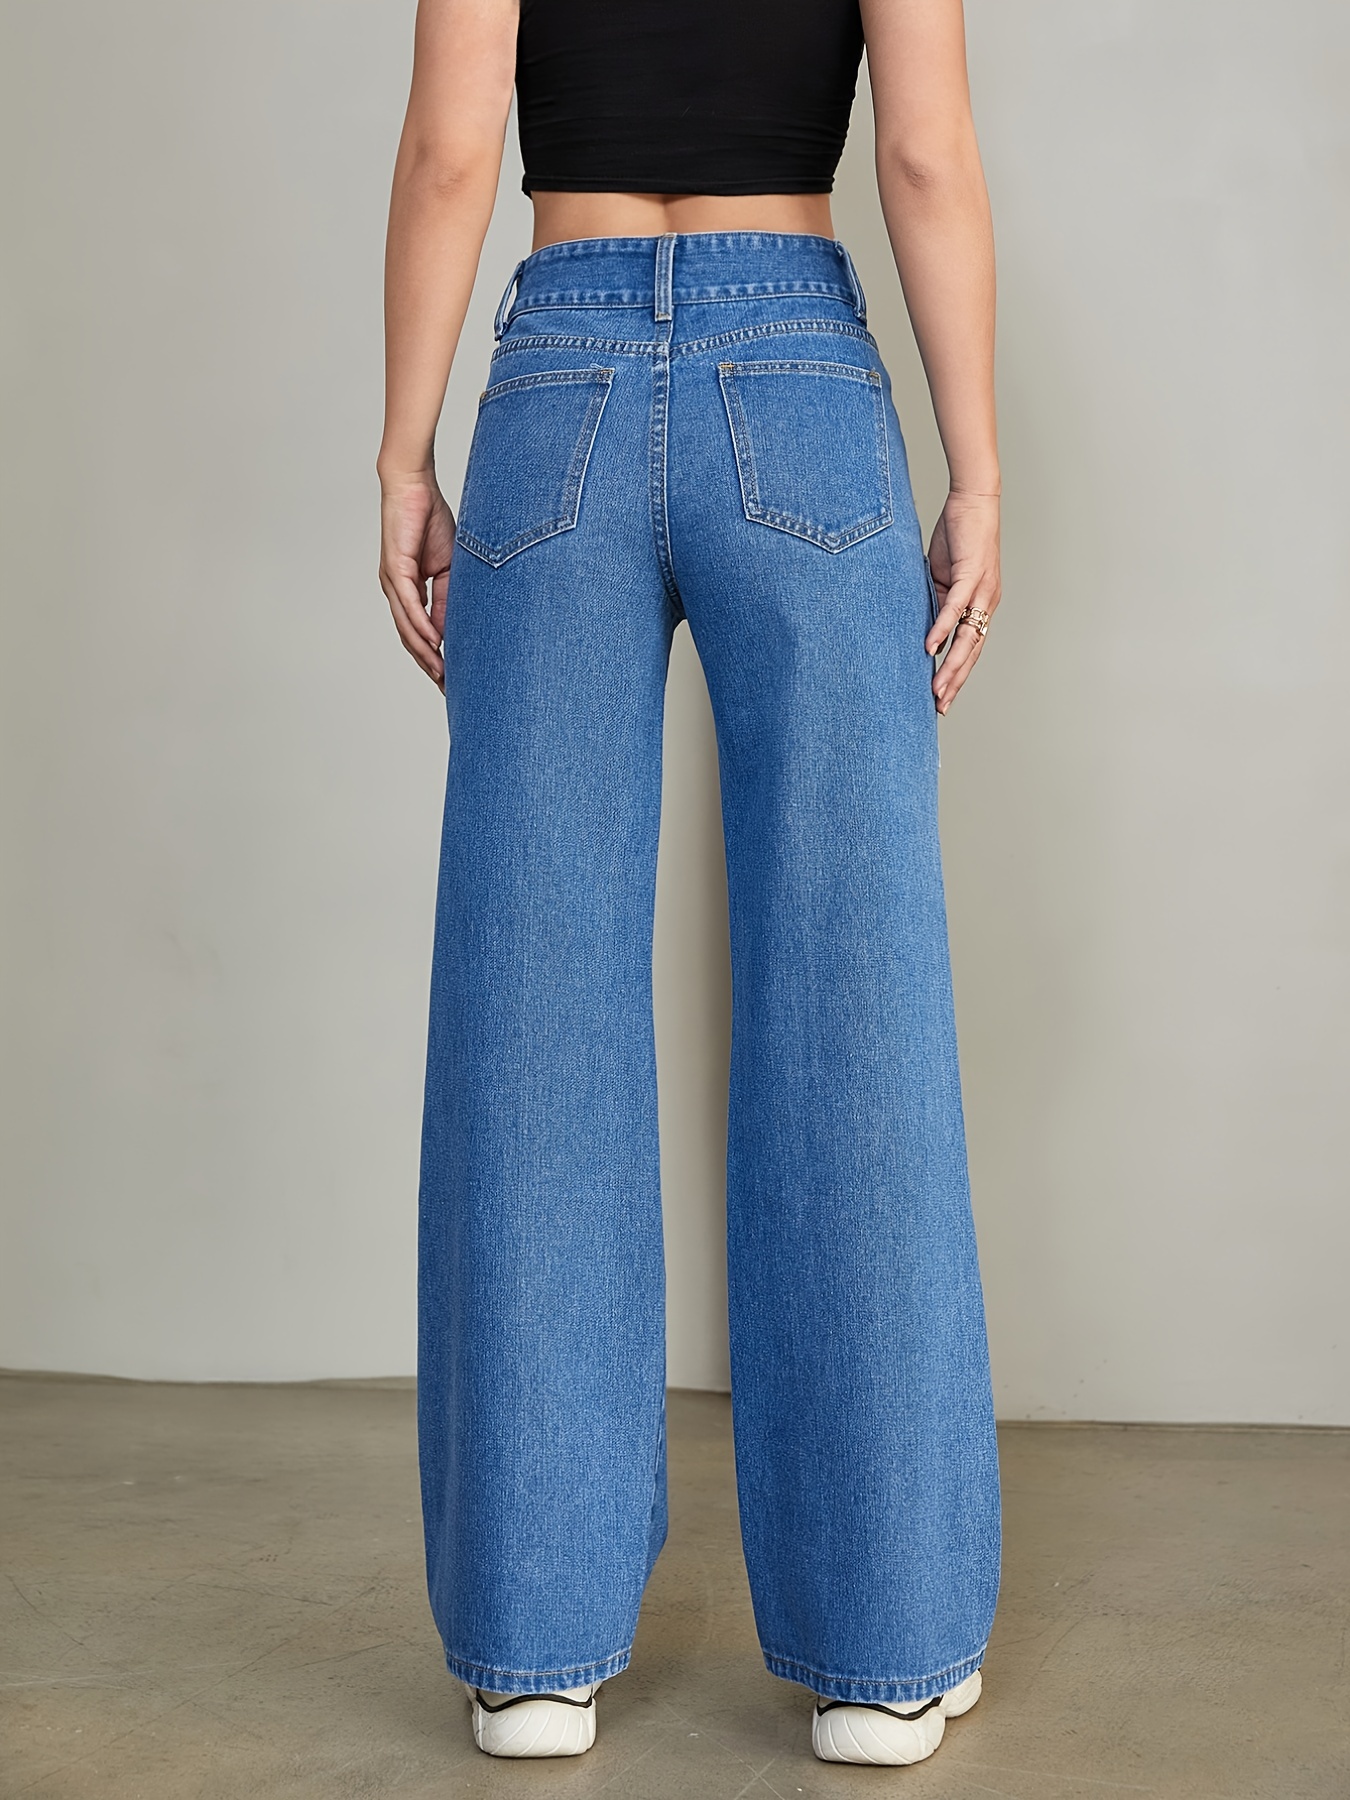 Jeans - Ropa - Mujer